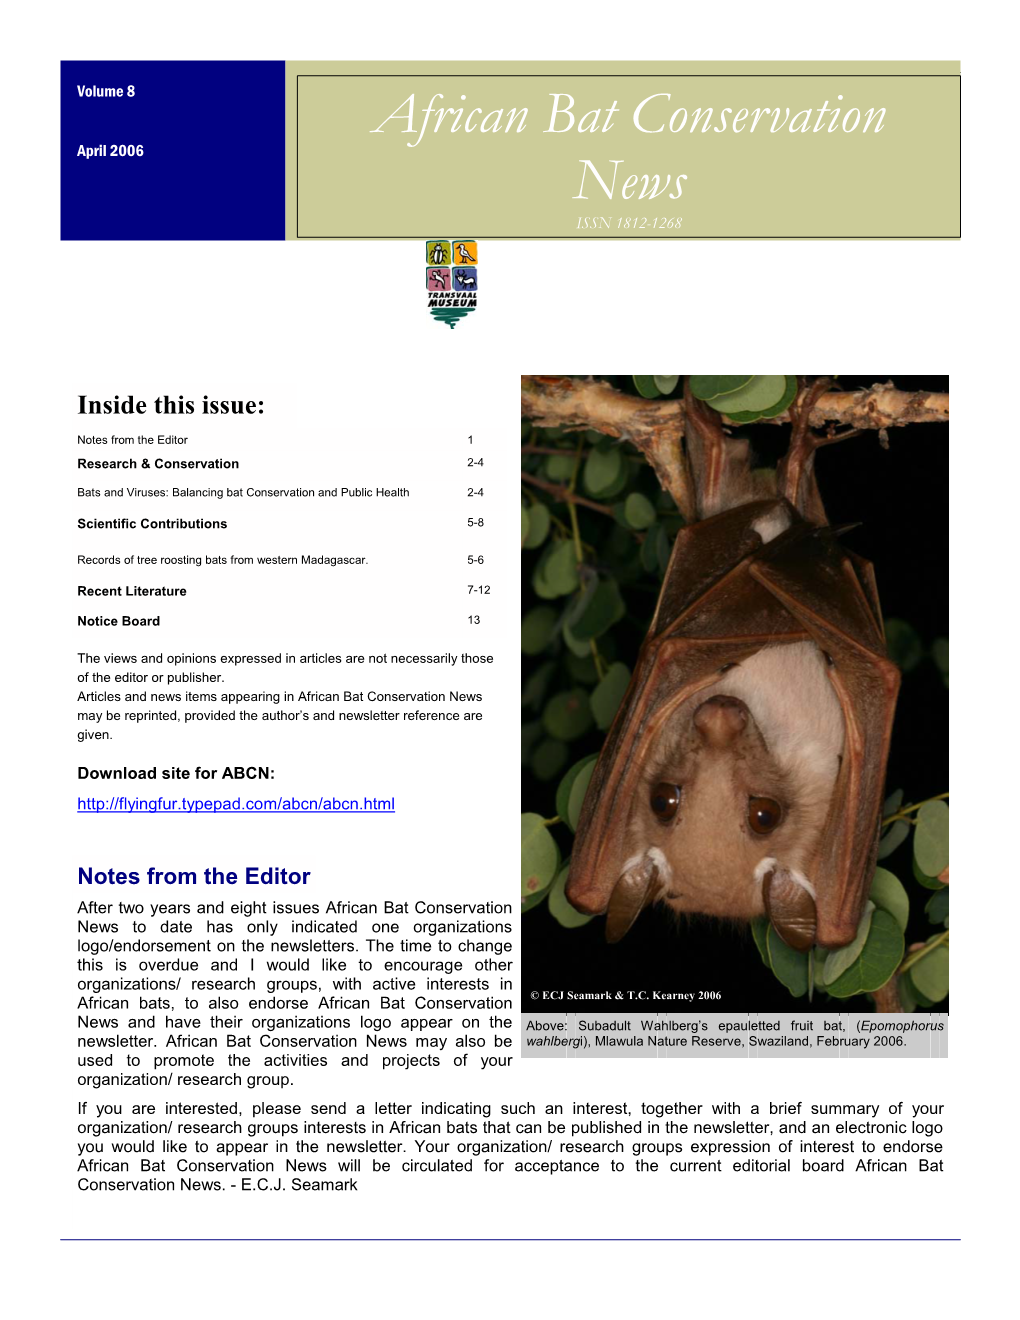 African Bat Conservation News May Be Reprinted, Provided the Author’S and Newsletter Reference Are Given